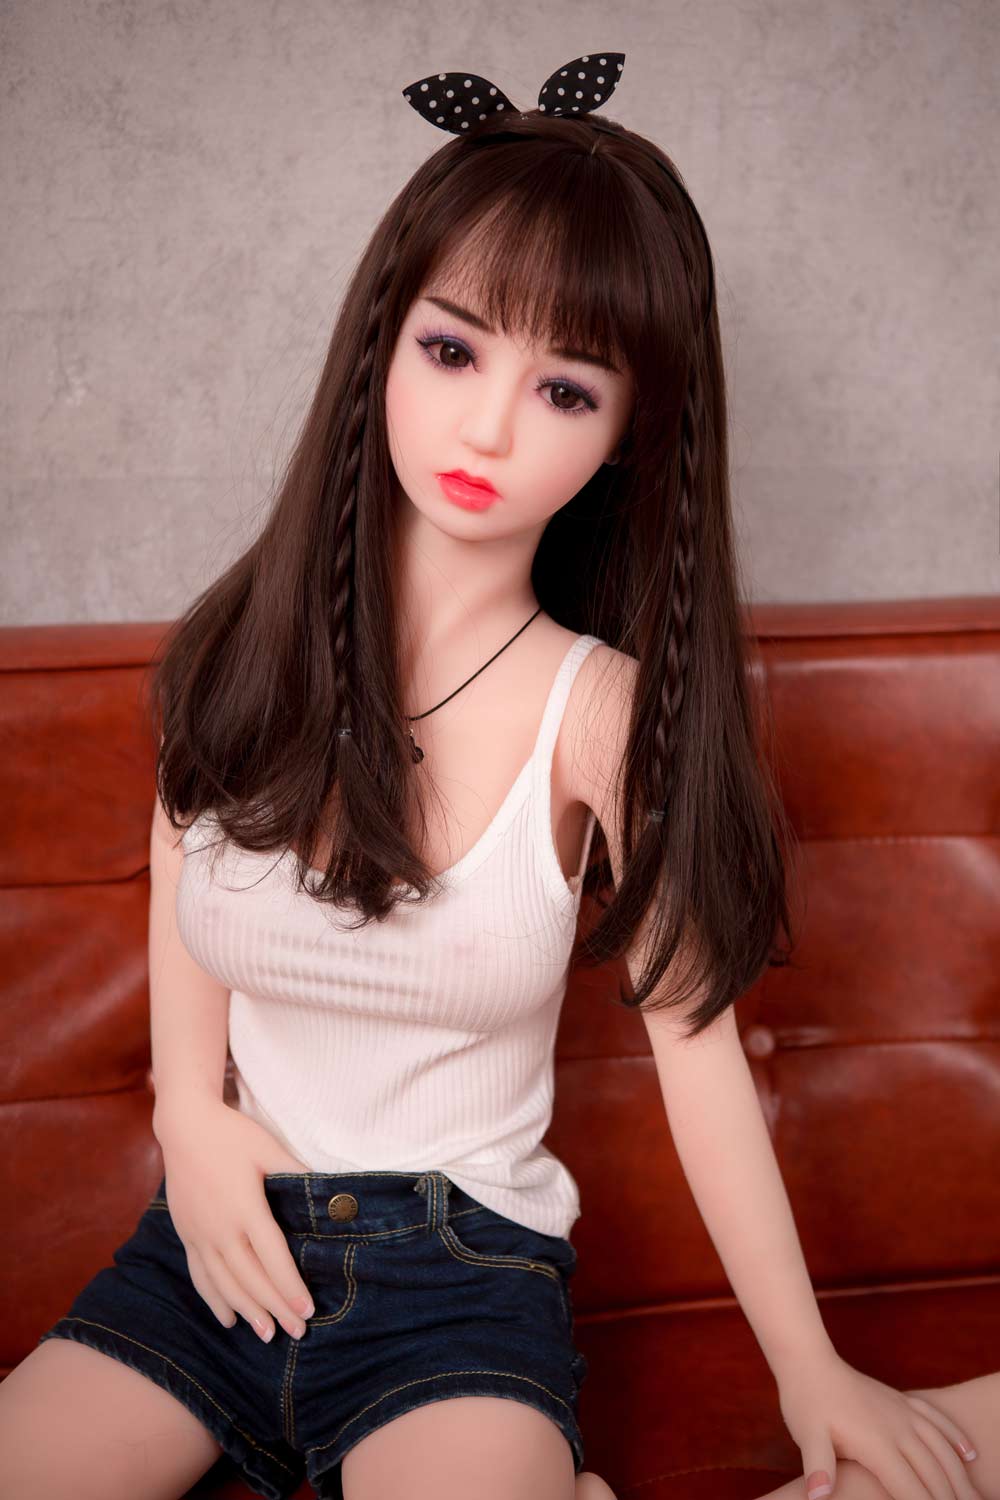 Mini sex doll with hands in denim shorts